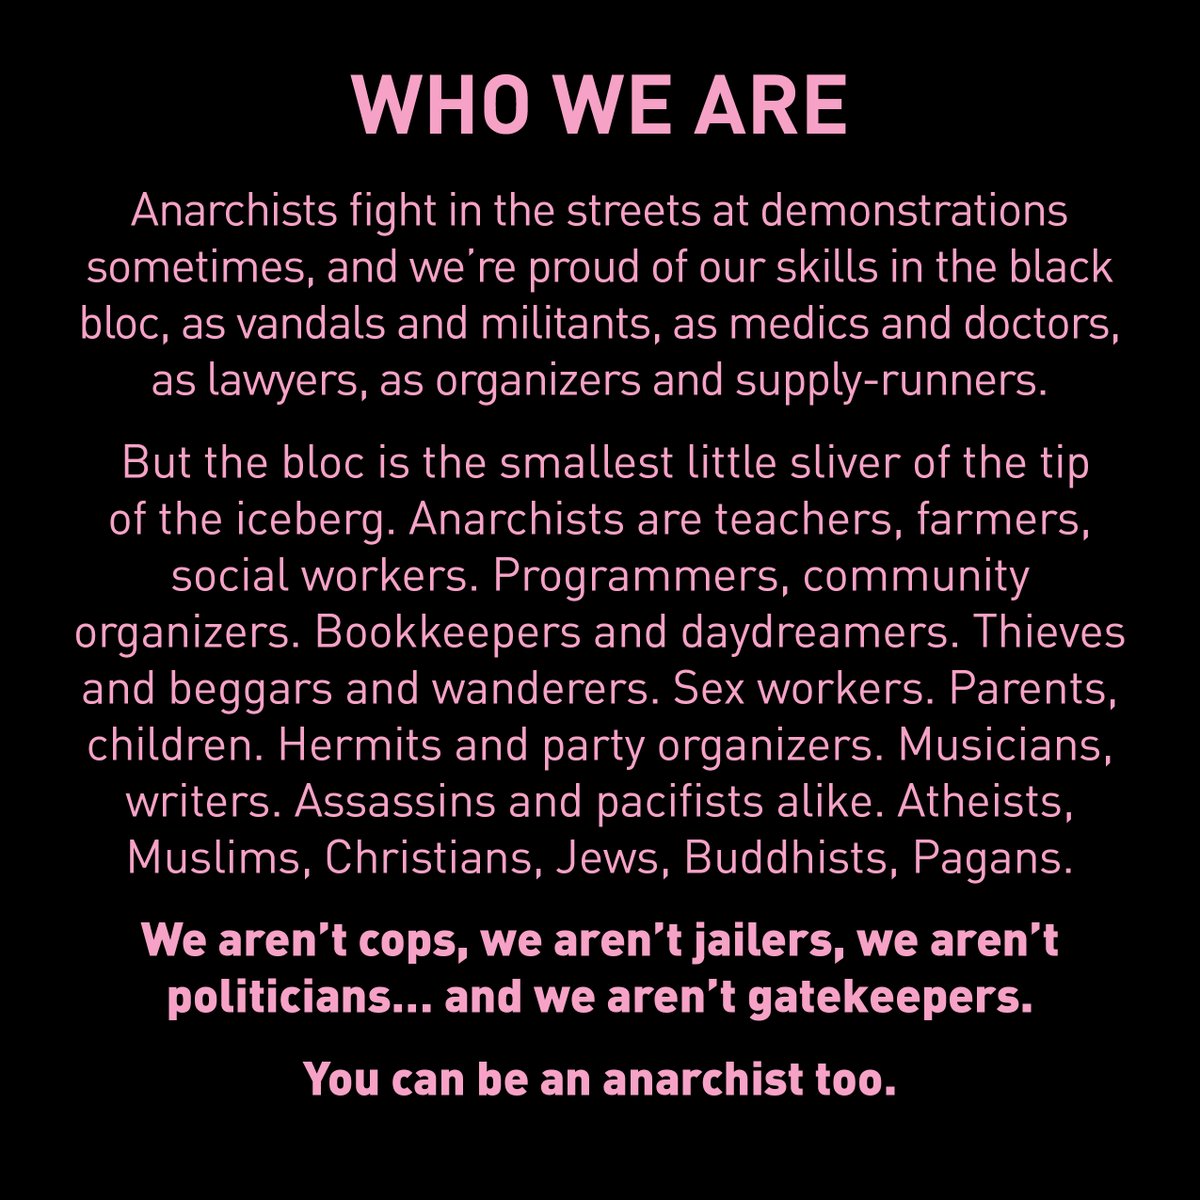 Just Who Are These Anarchists?(reposted from Black Powder Press on Instagram, an introduction to anarchism. I'll put the text from the slides in a long thread below the images.)